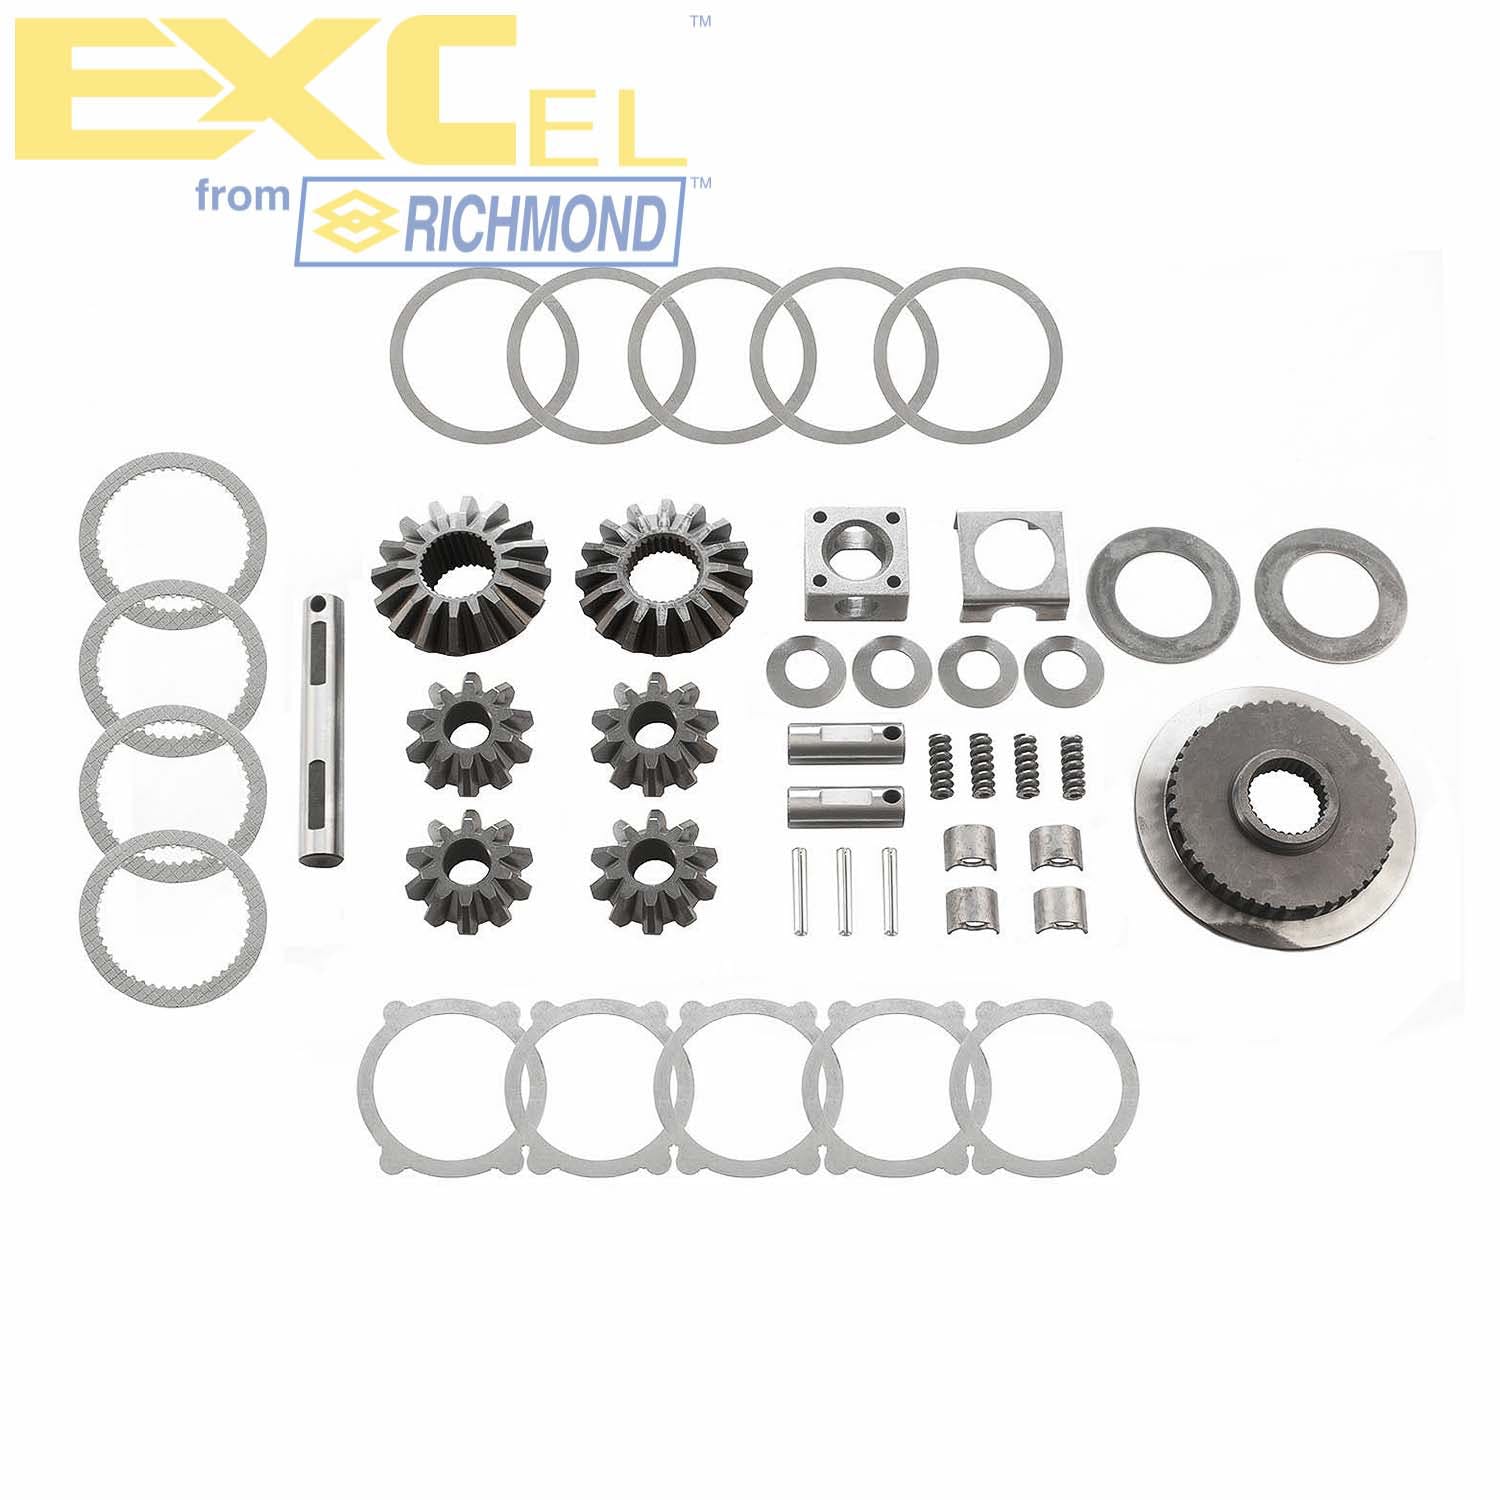 Excel XL-4028 Differential Carrier Gear Kit